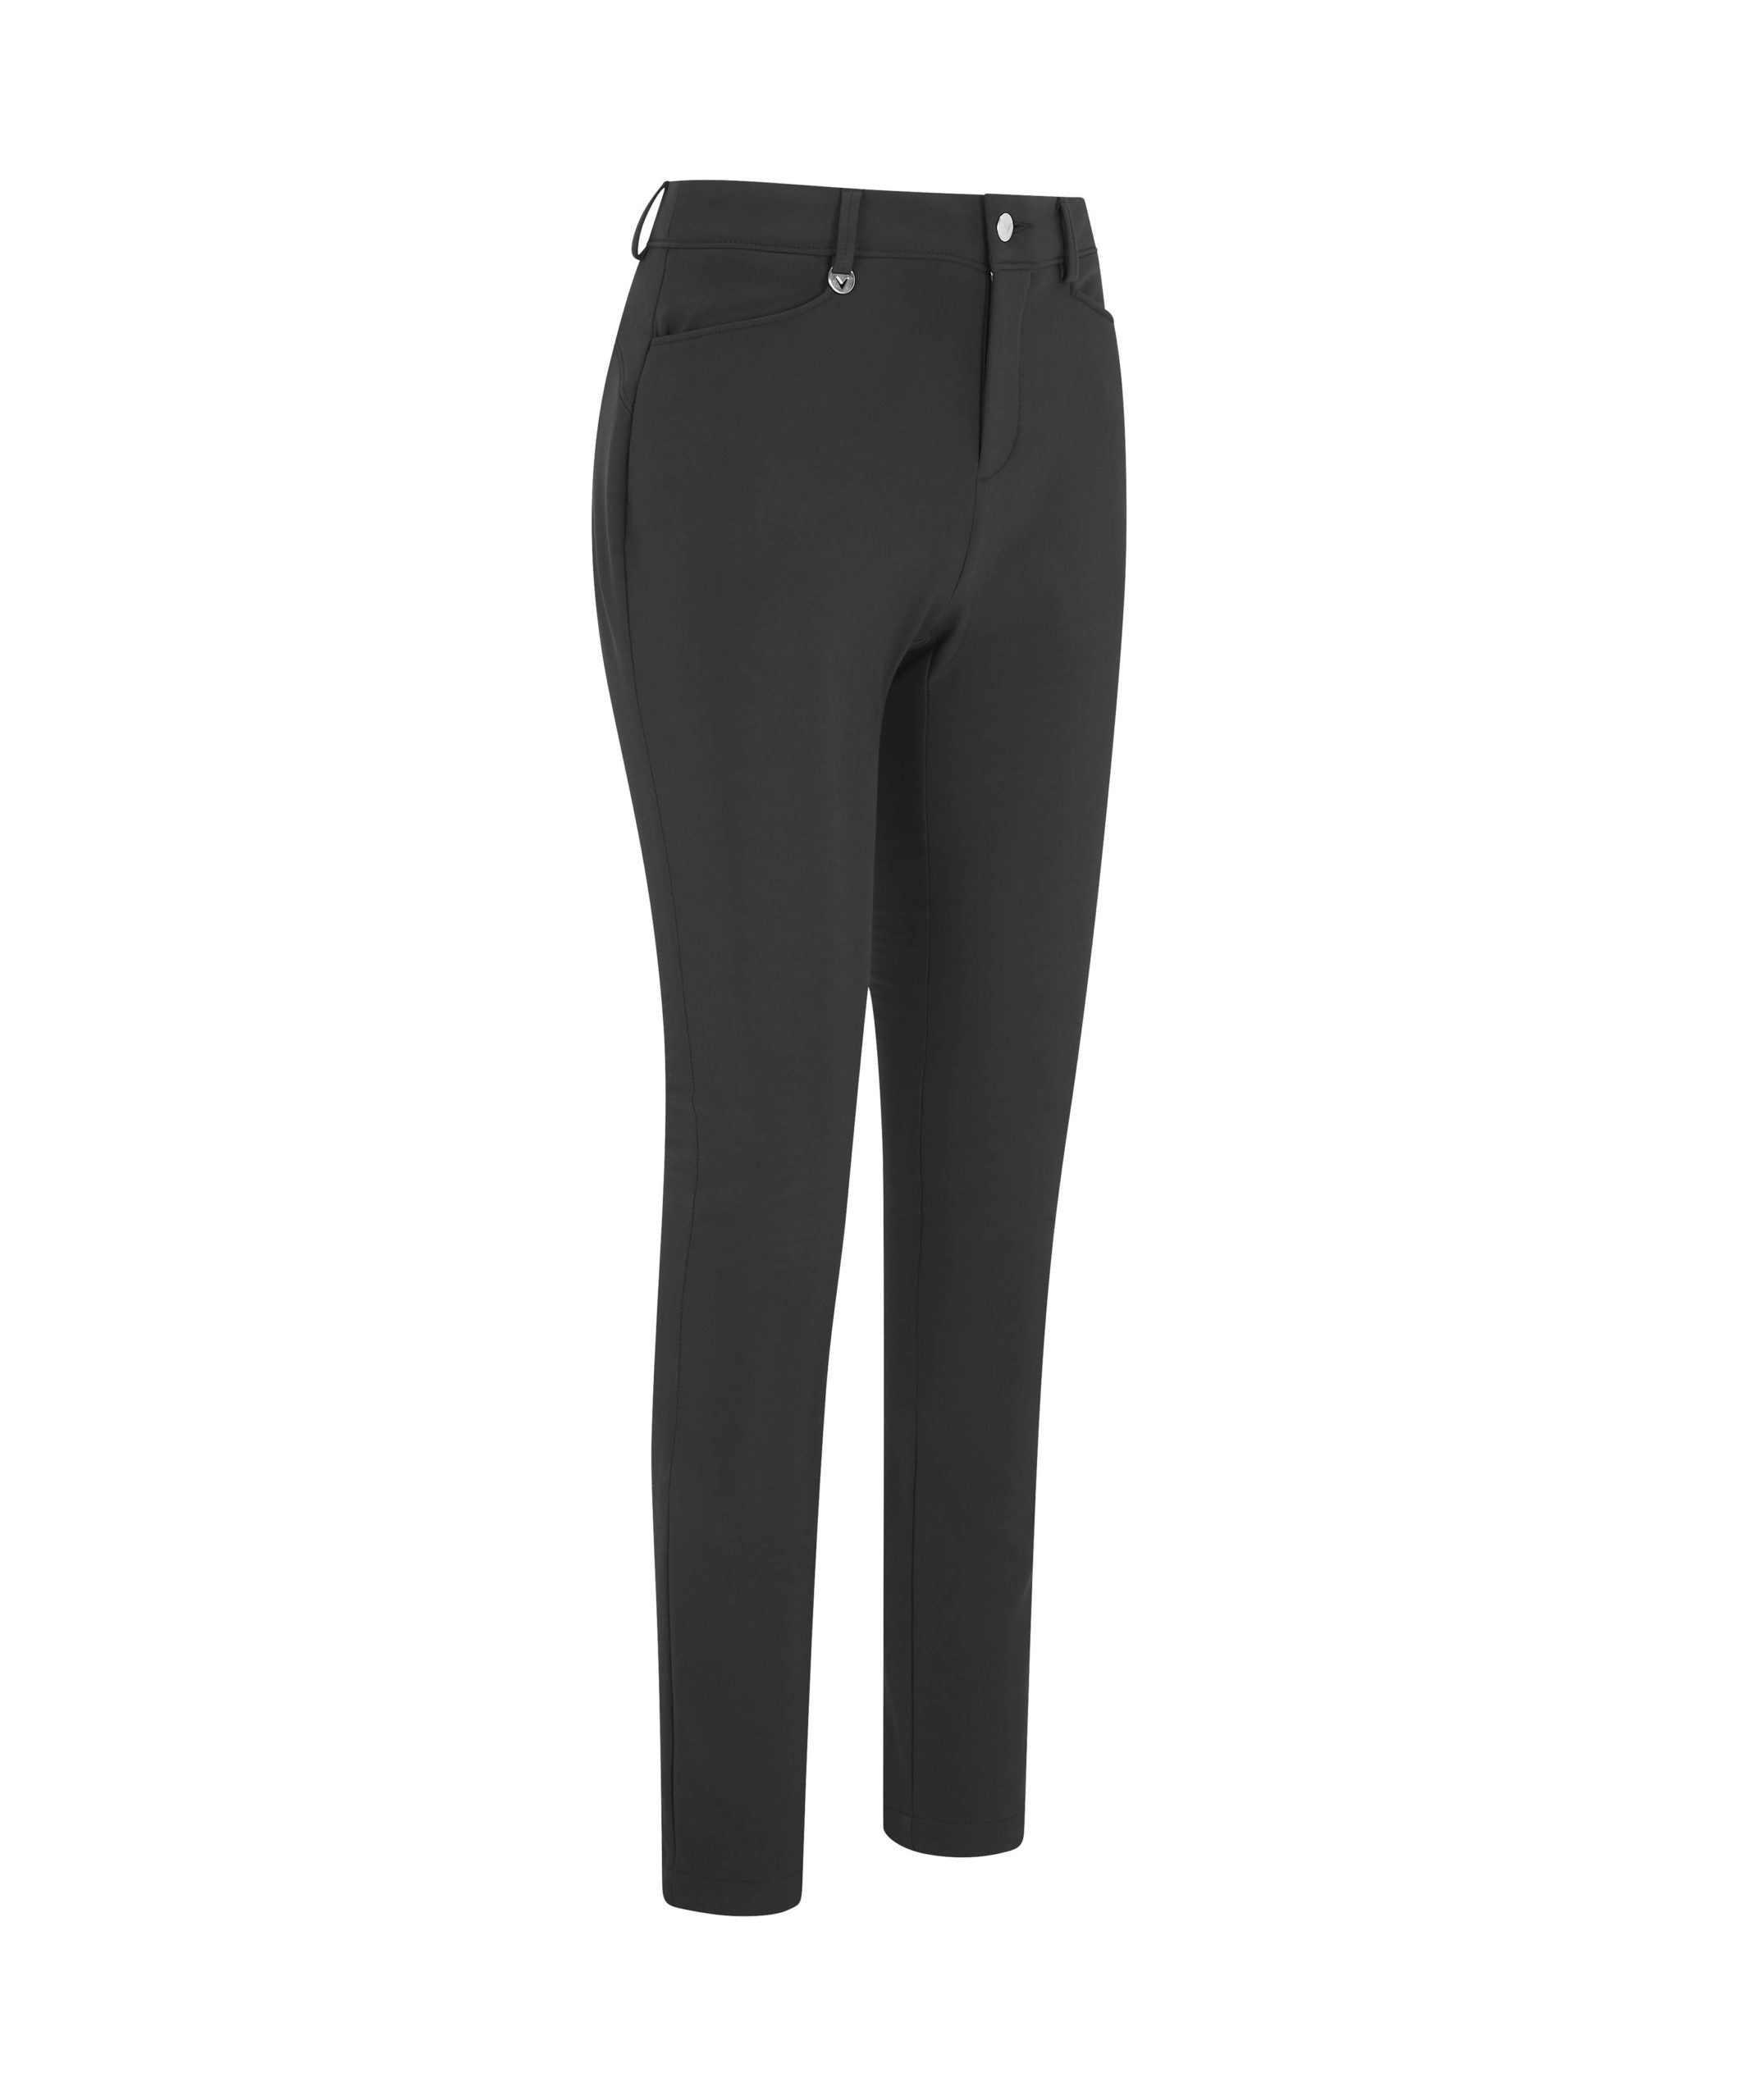 View Thermal Trousers In Caviar Caviar 18 27 information